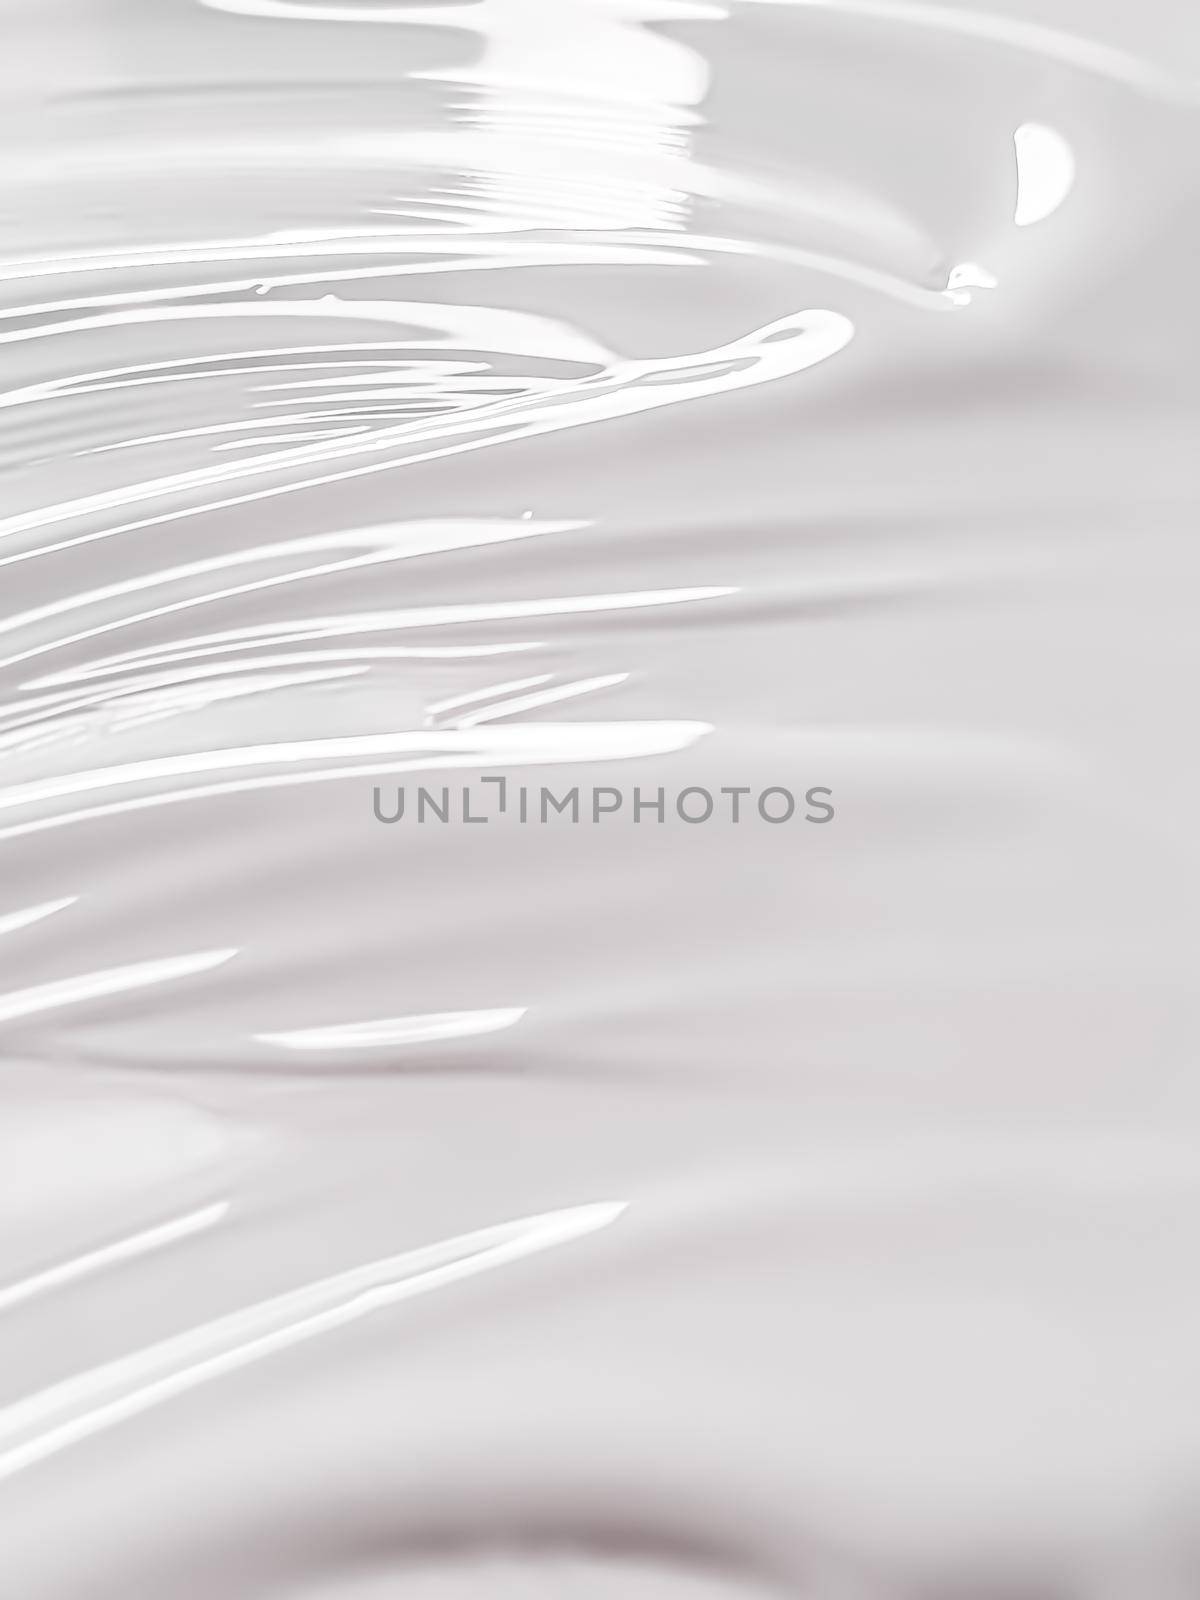 Glossy white cosmetic texture as beauty make-up product background, cosmetics and luxury makeup brand design by Anneleven